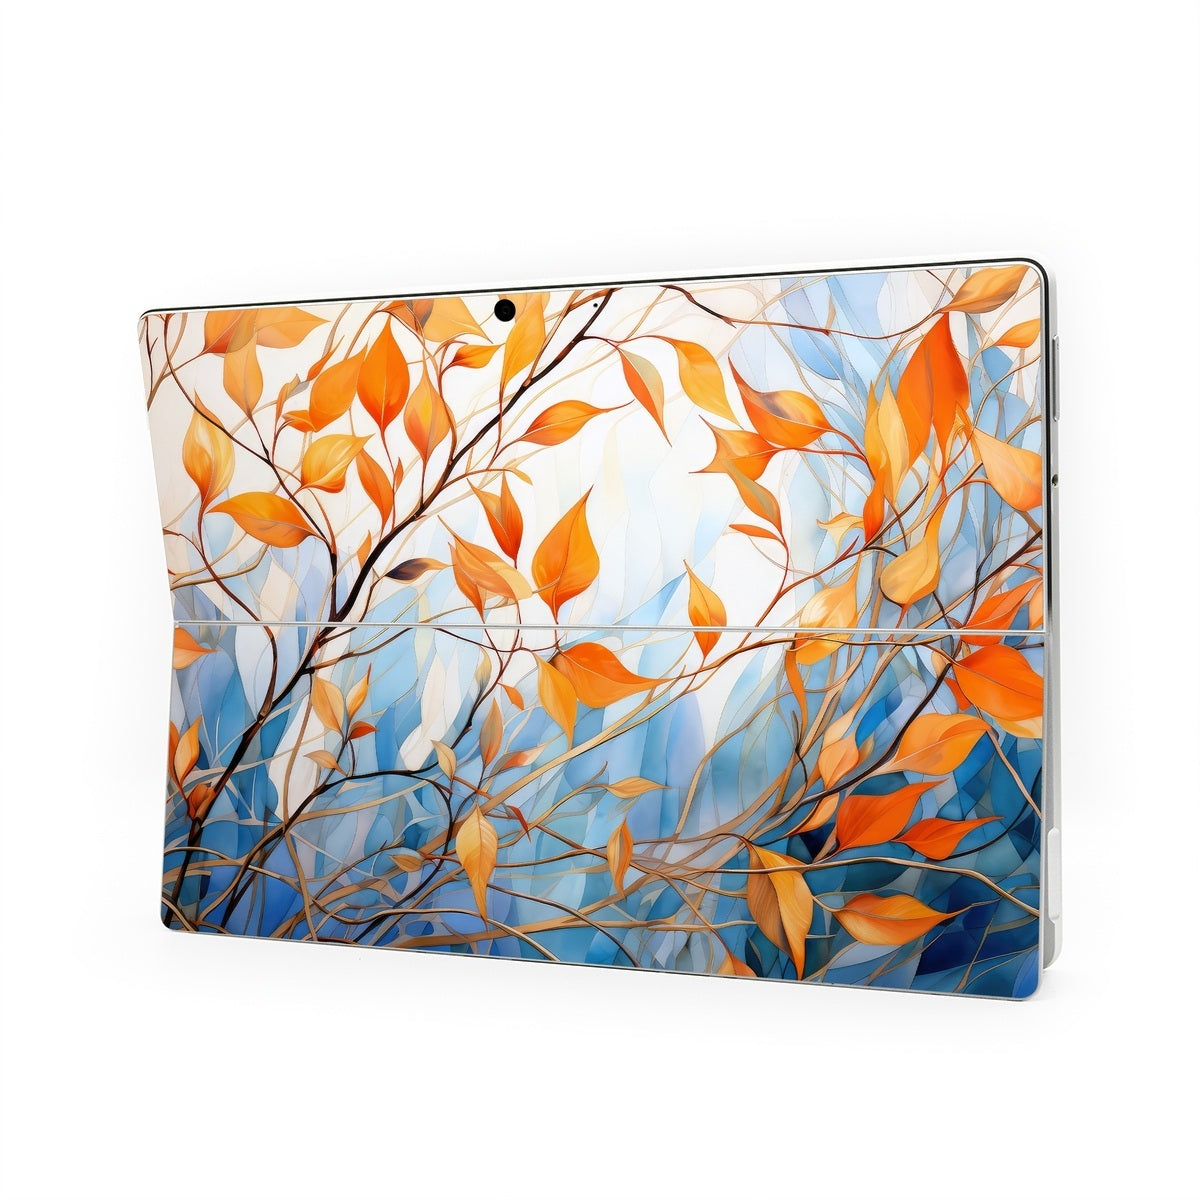 Blustery Day - Microsoft Surface Pro Skin